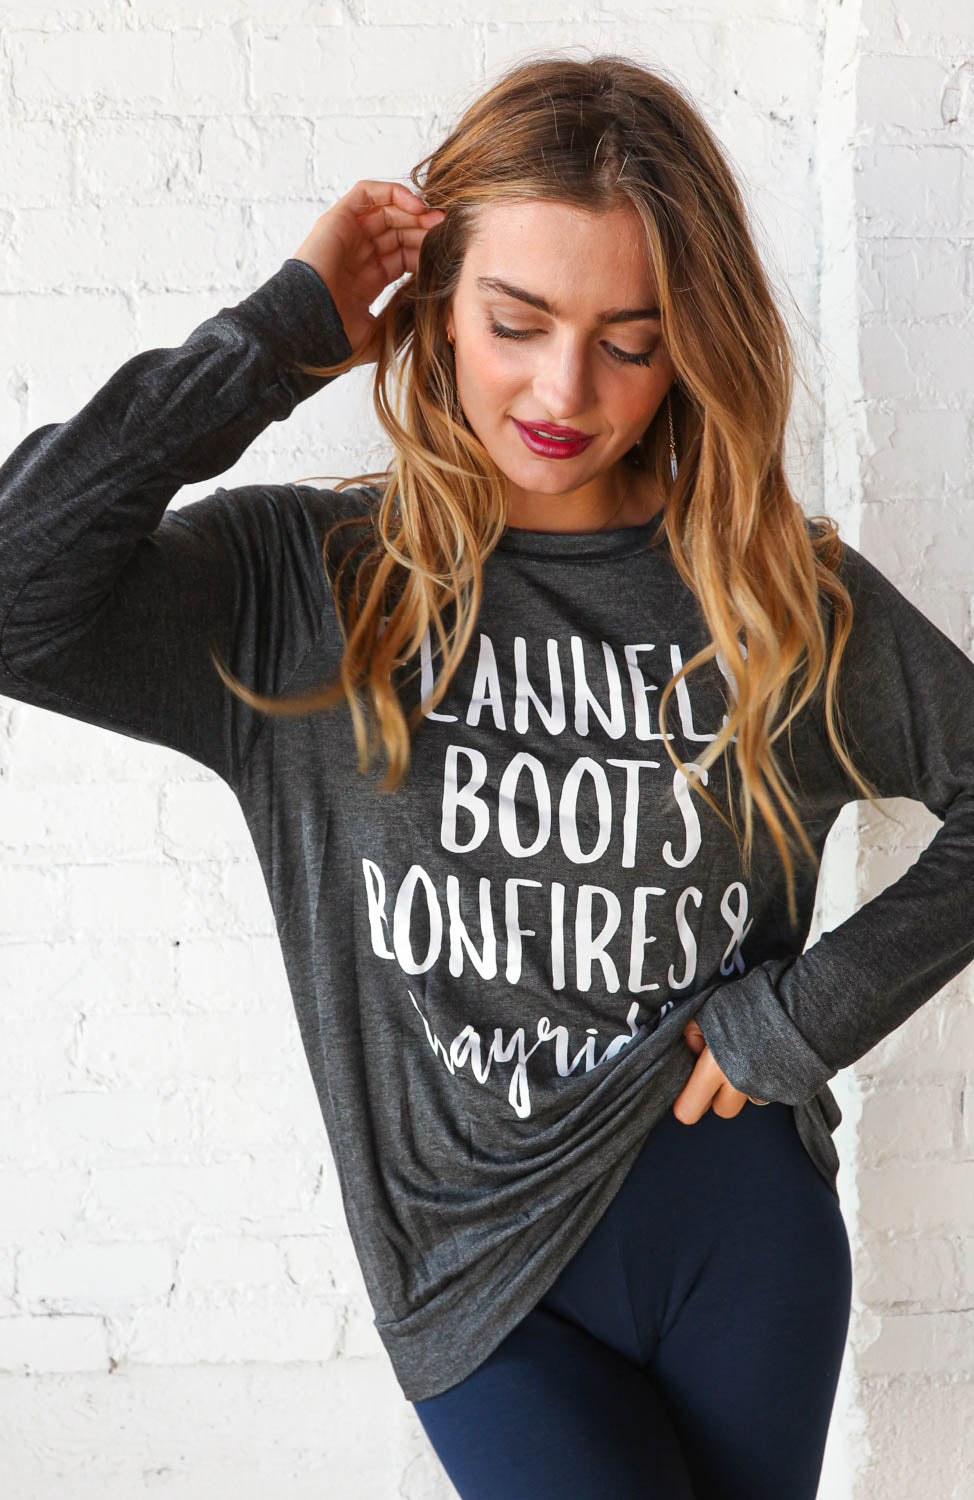 Flannel Boots Bonfires Graphic Tee